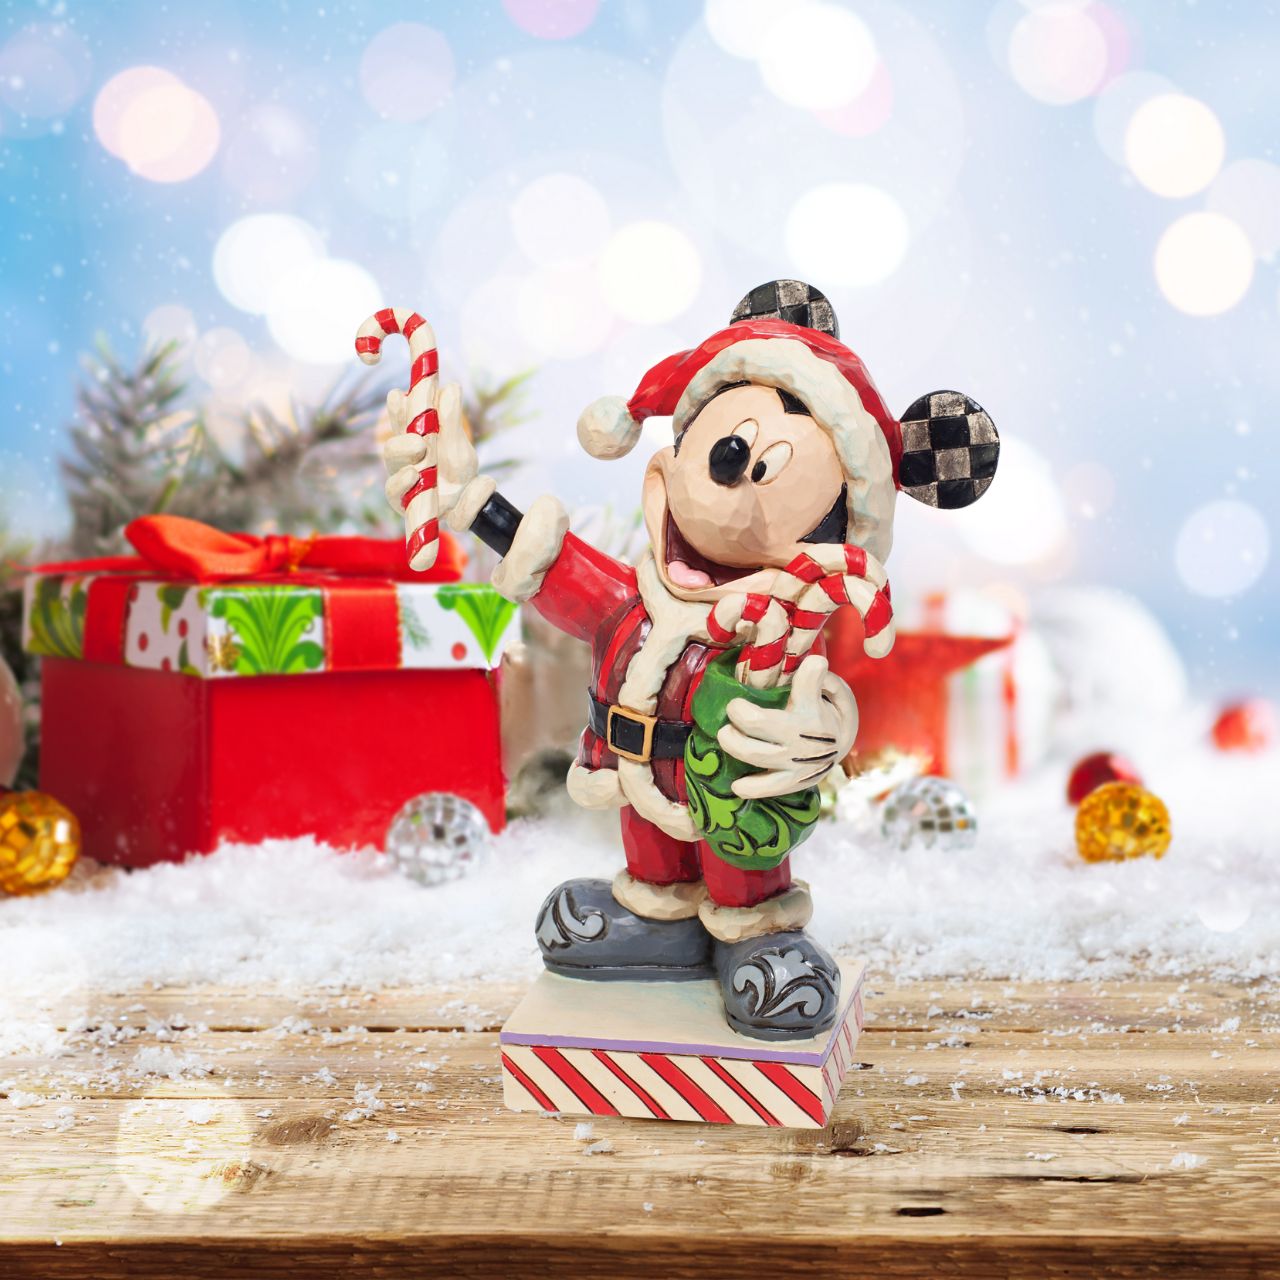 Disney Mickey Mouse with Candy Canes Figurine  Dressed in a Santa suit, Mickey masquerades as the holiday titan. Delivering candy canes to all the nice people he knows, he brings the spirit of Christmas wherever he goes.